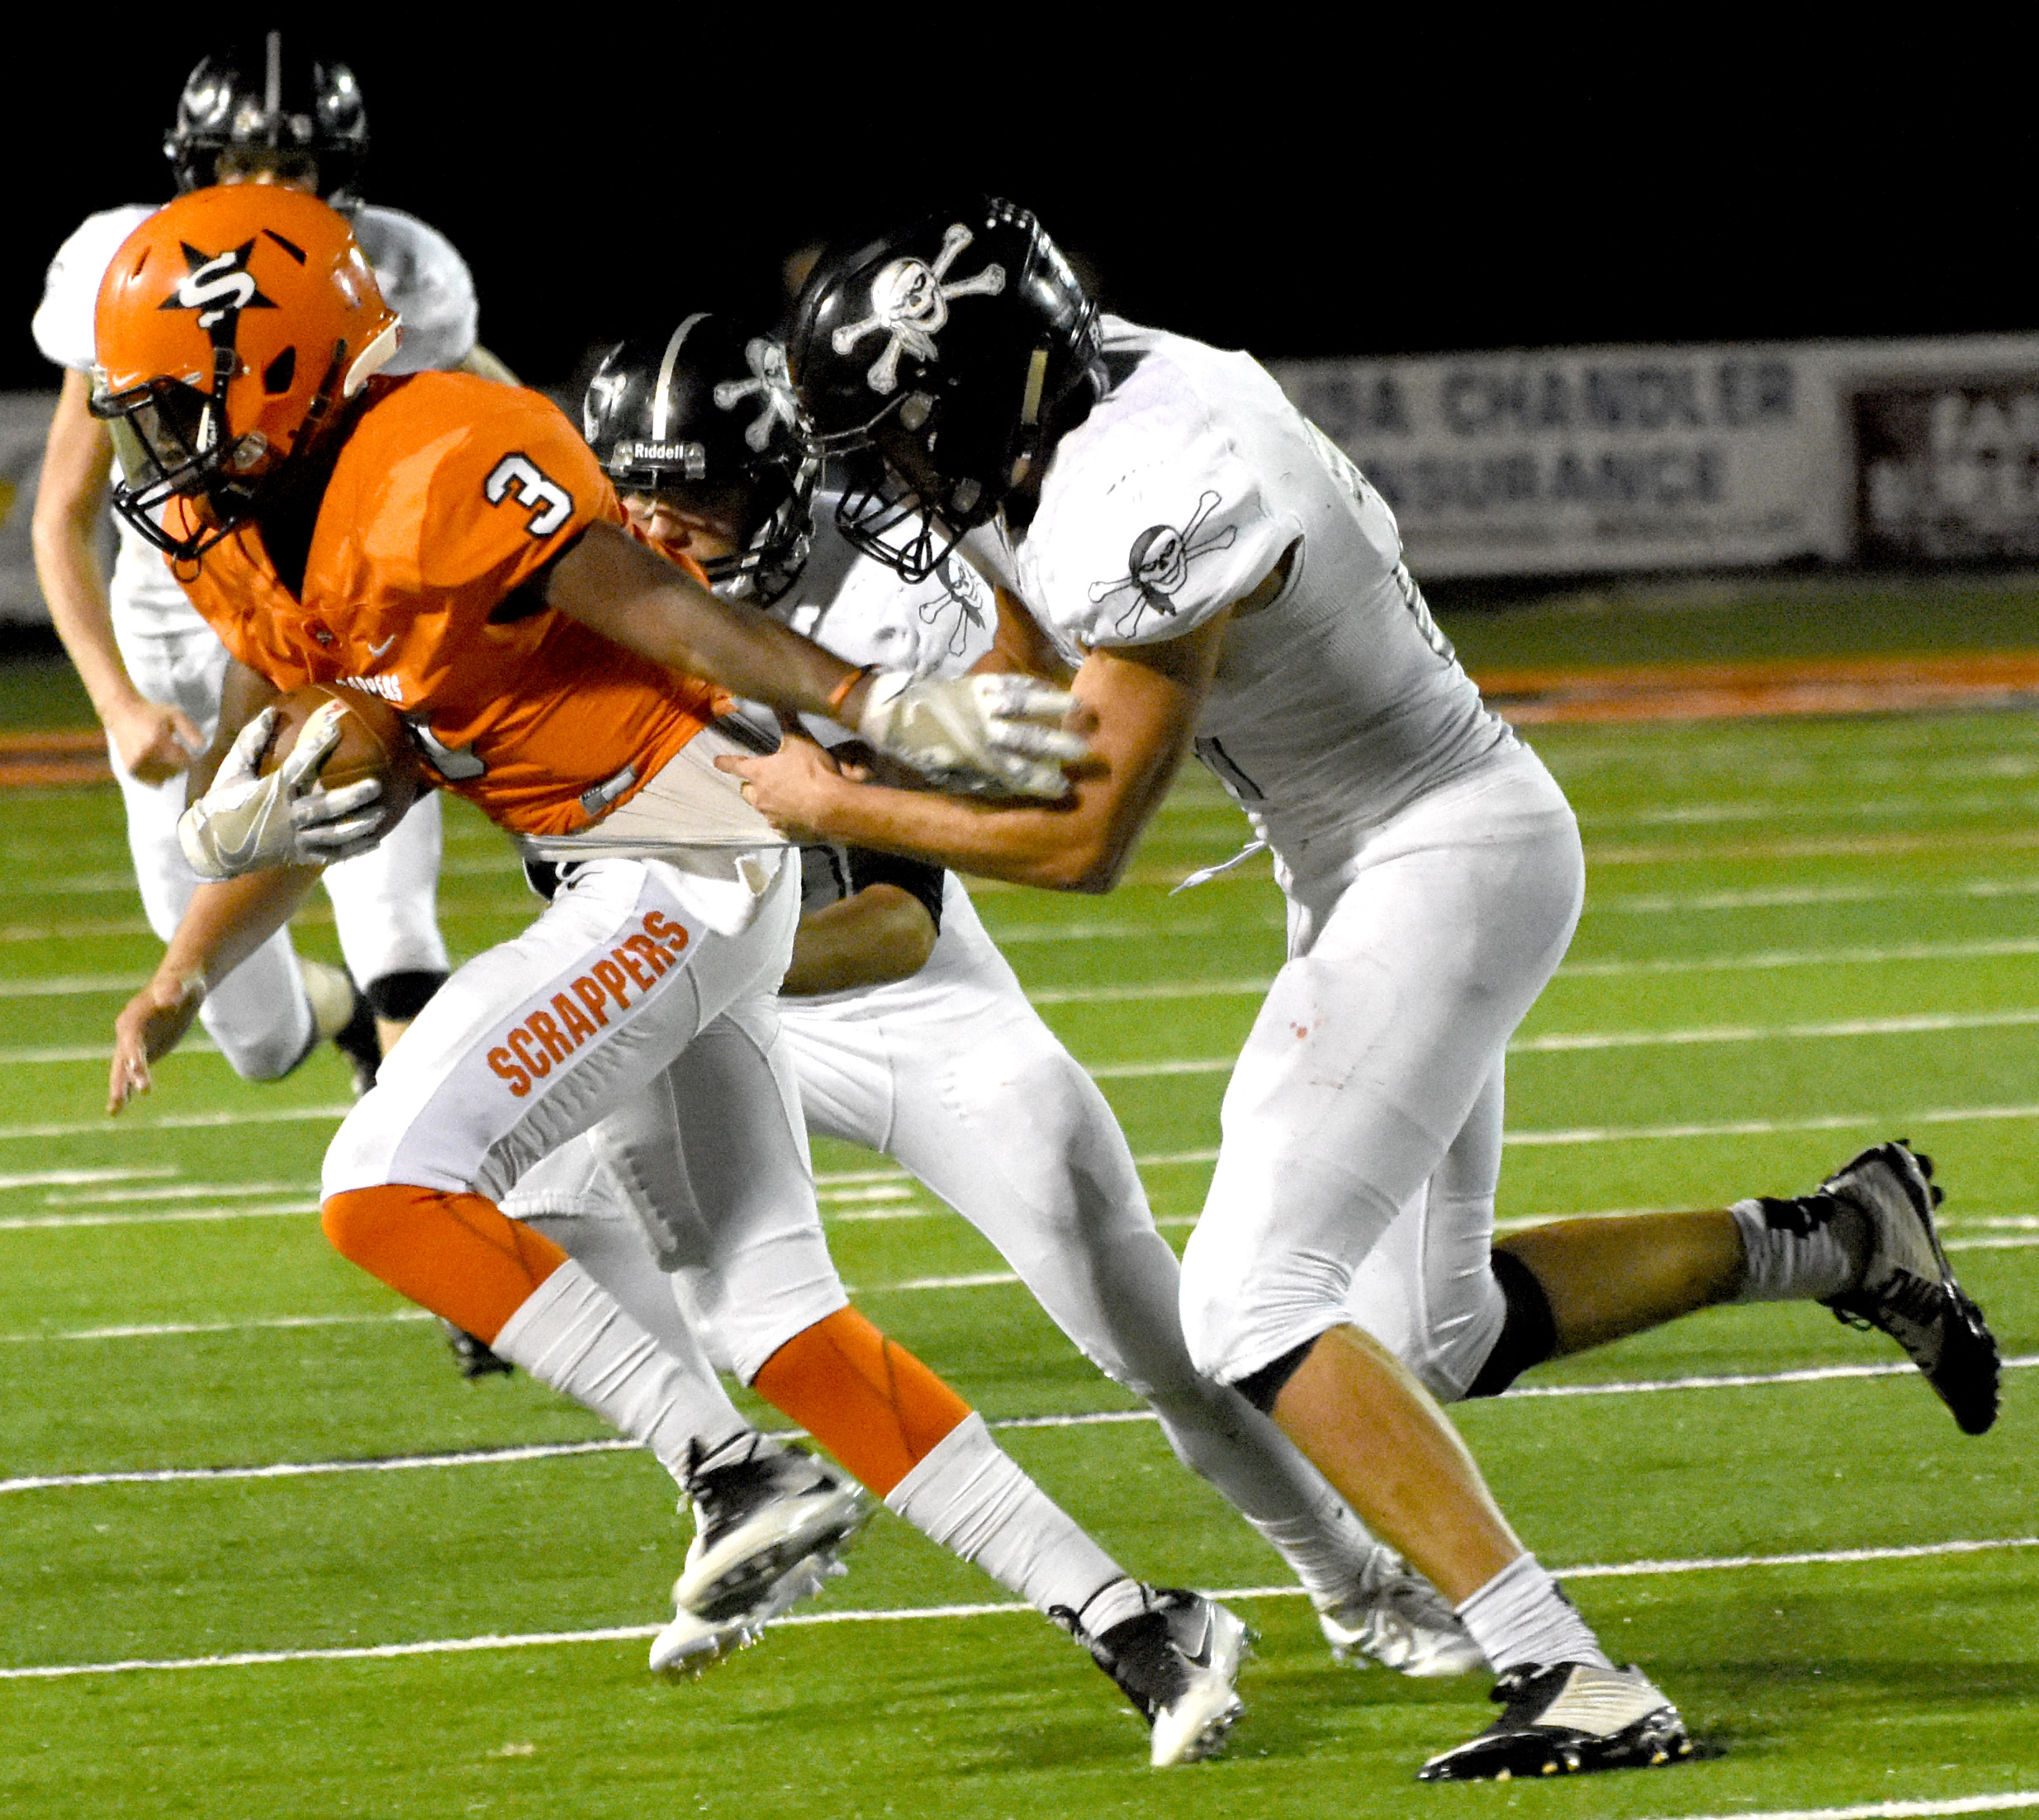 Dominick Kight gets past the Dover defender.